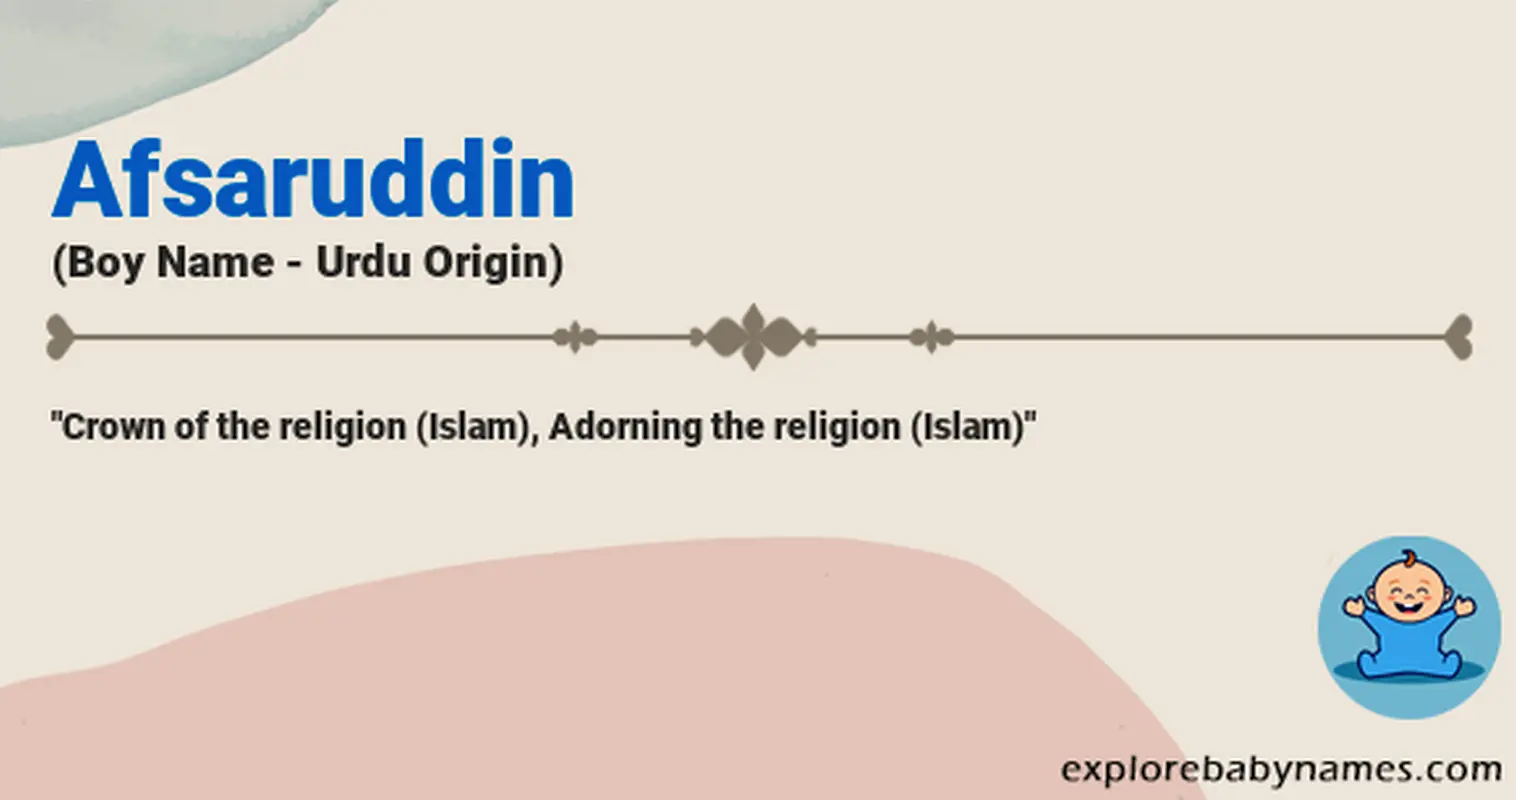 Meaning of Afsaruddin